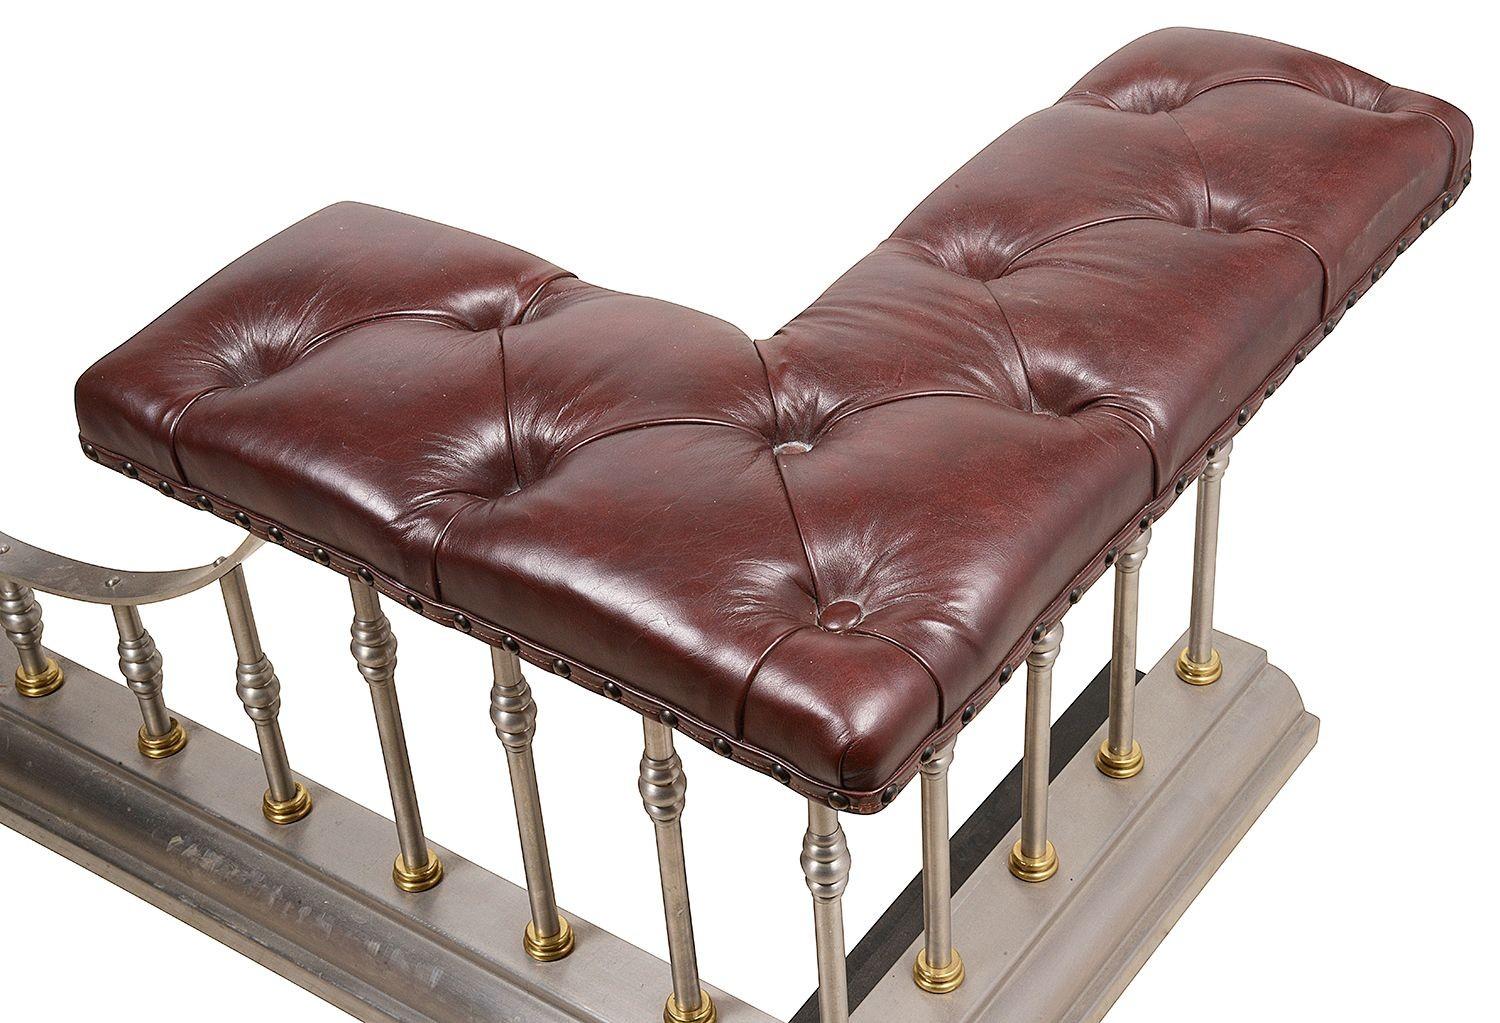 English Club Fire Fender, Upholstered in Leather, circa 1900